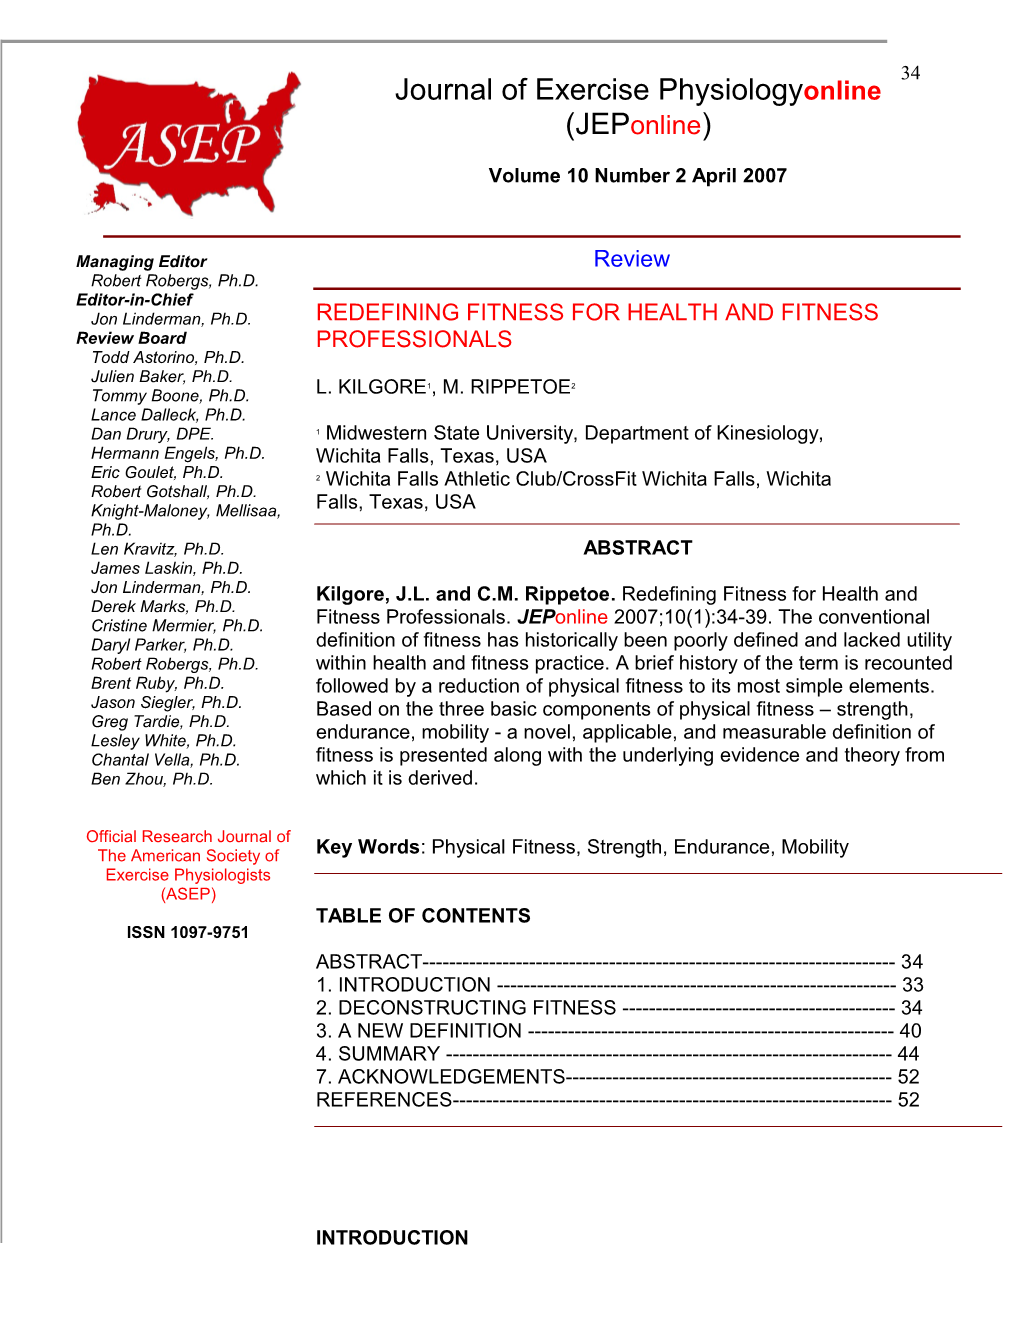 Review Redefining Fitness for Health and Fitness Professionals